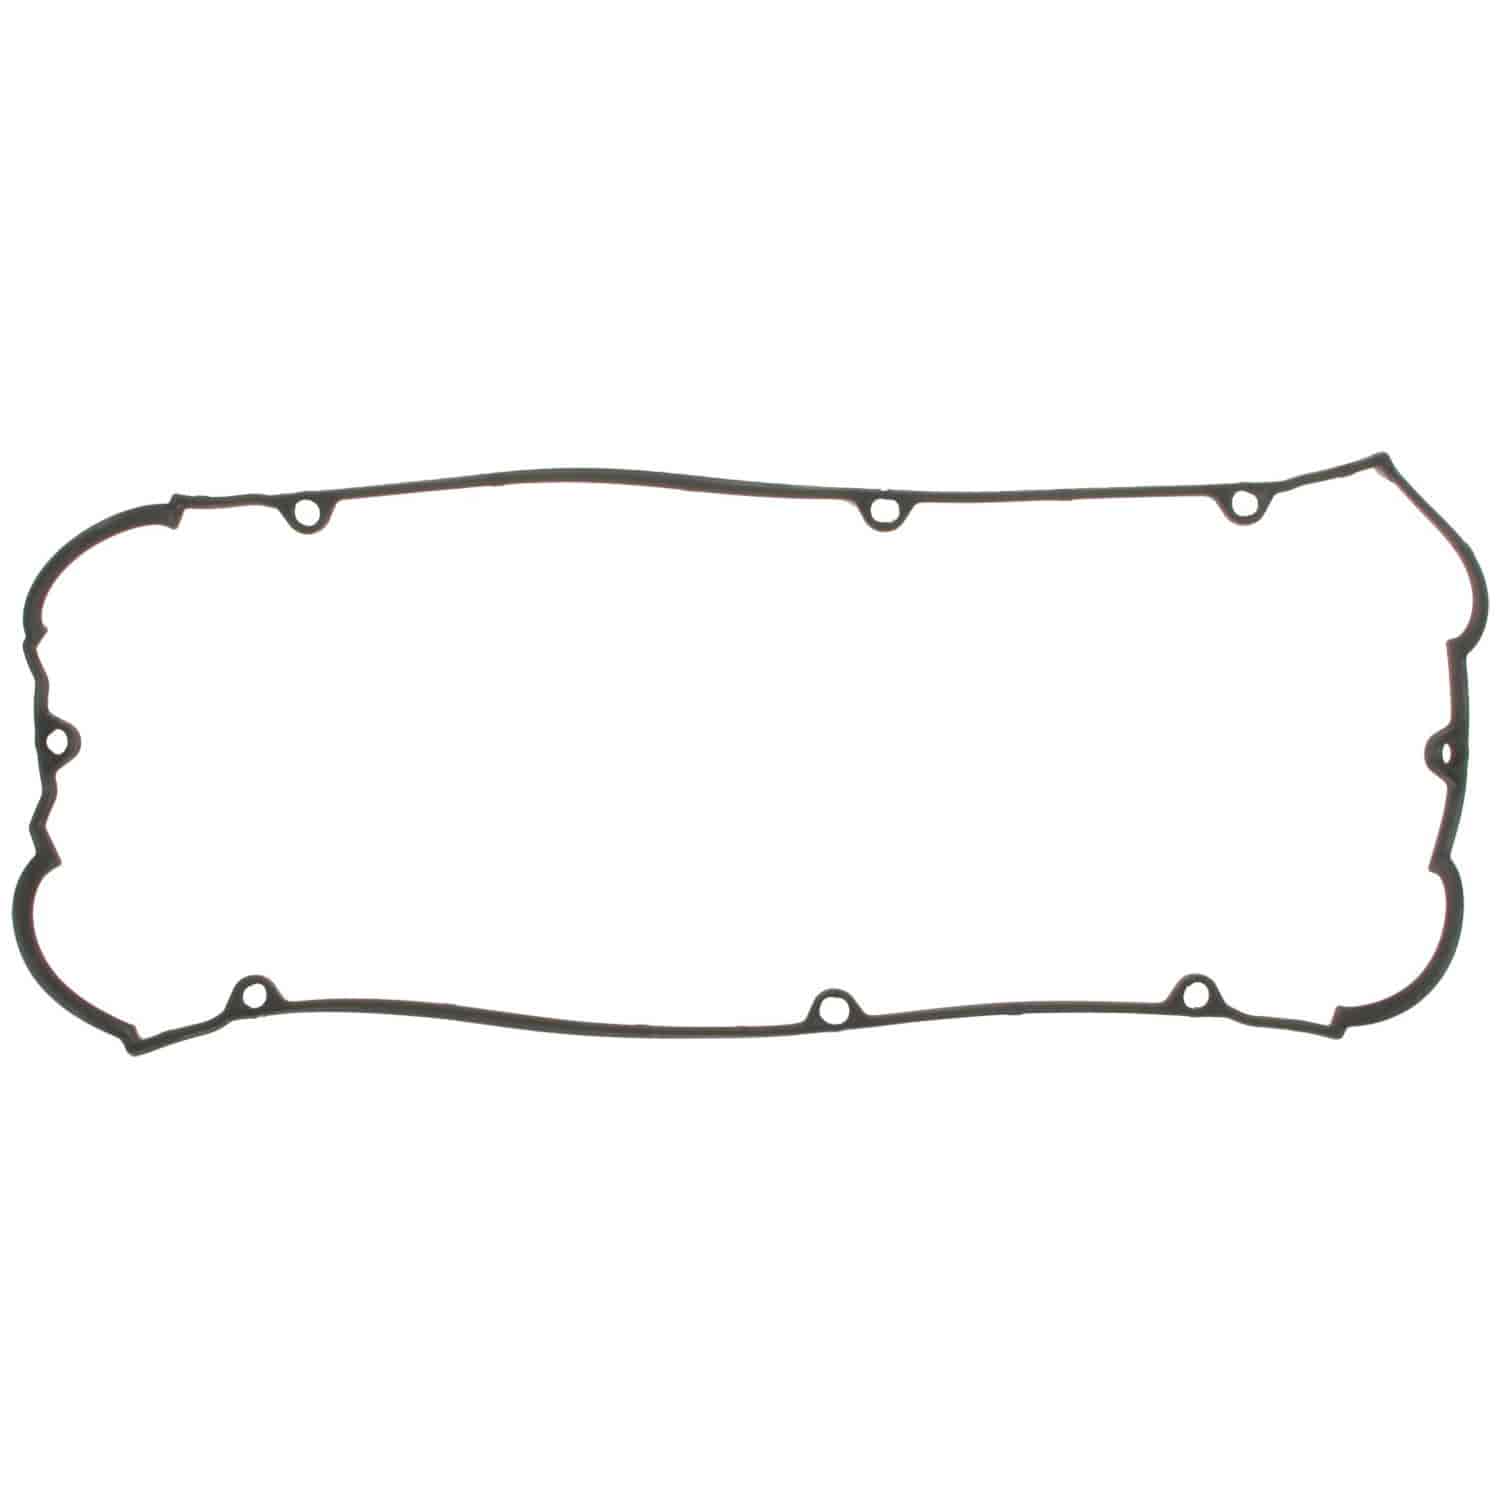 Valve Cover Gasket KIA 3.5L V6 6G74 2002-2005 LEFT AND RIGHT